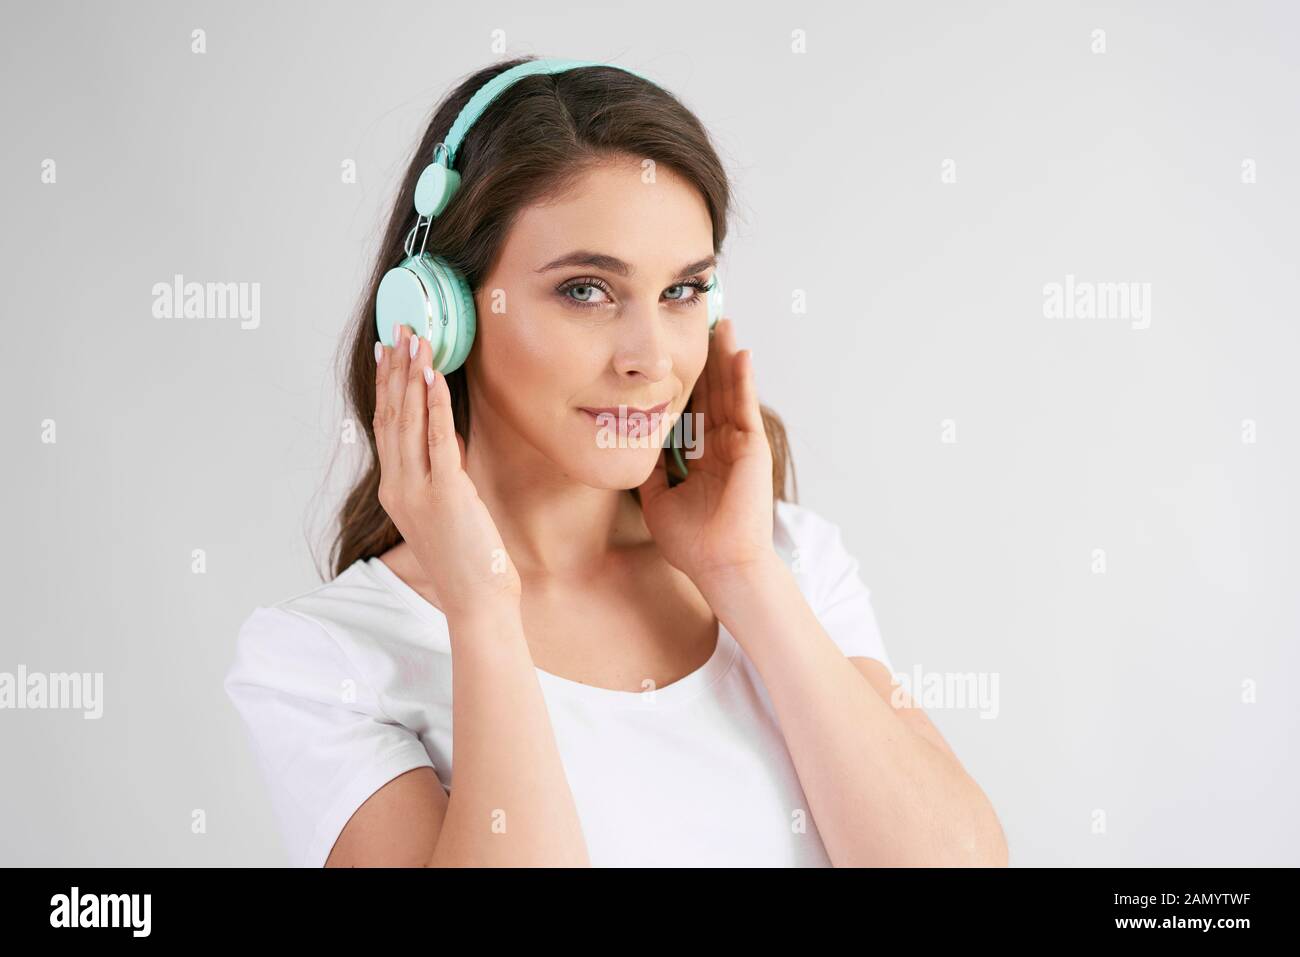 Portrait of young woman with headphones listening to music Stock Photo